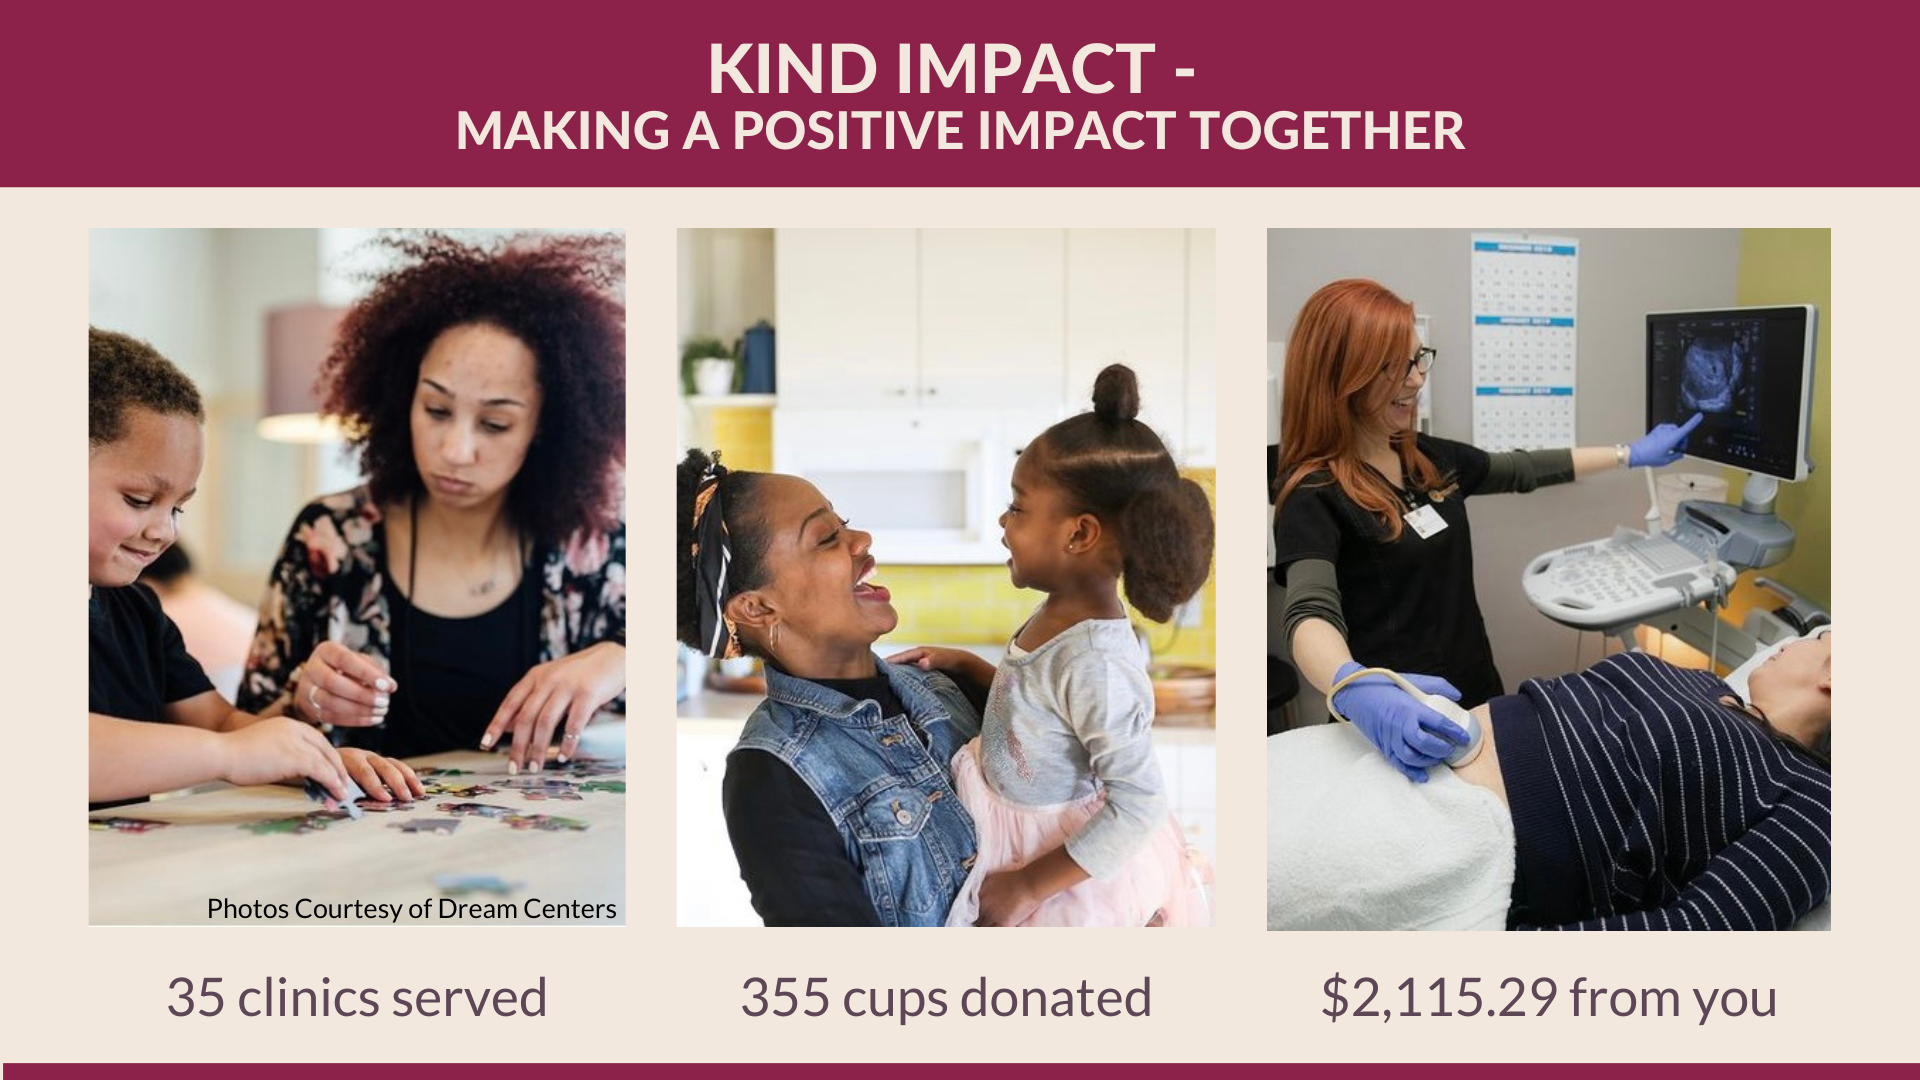 Kind Impact - Making a positive impact together. 35 clinics served, 355 cups donated, $2,115.29 from you. Three photos from one of our partner non-profit clinics.